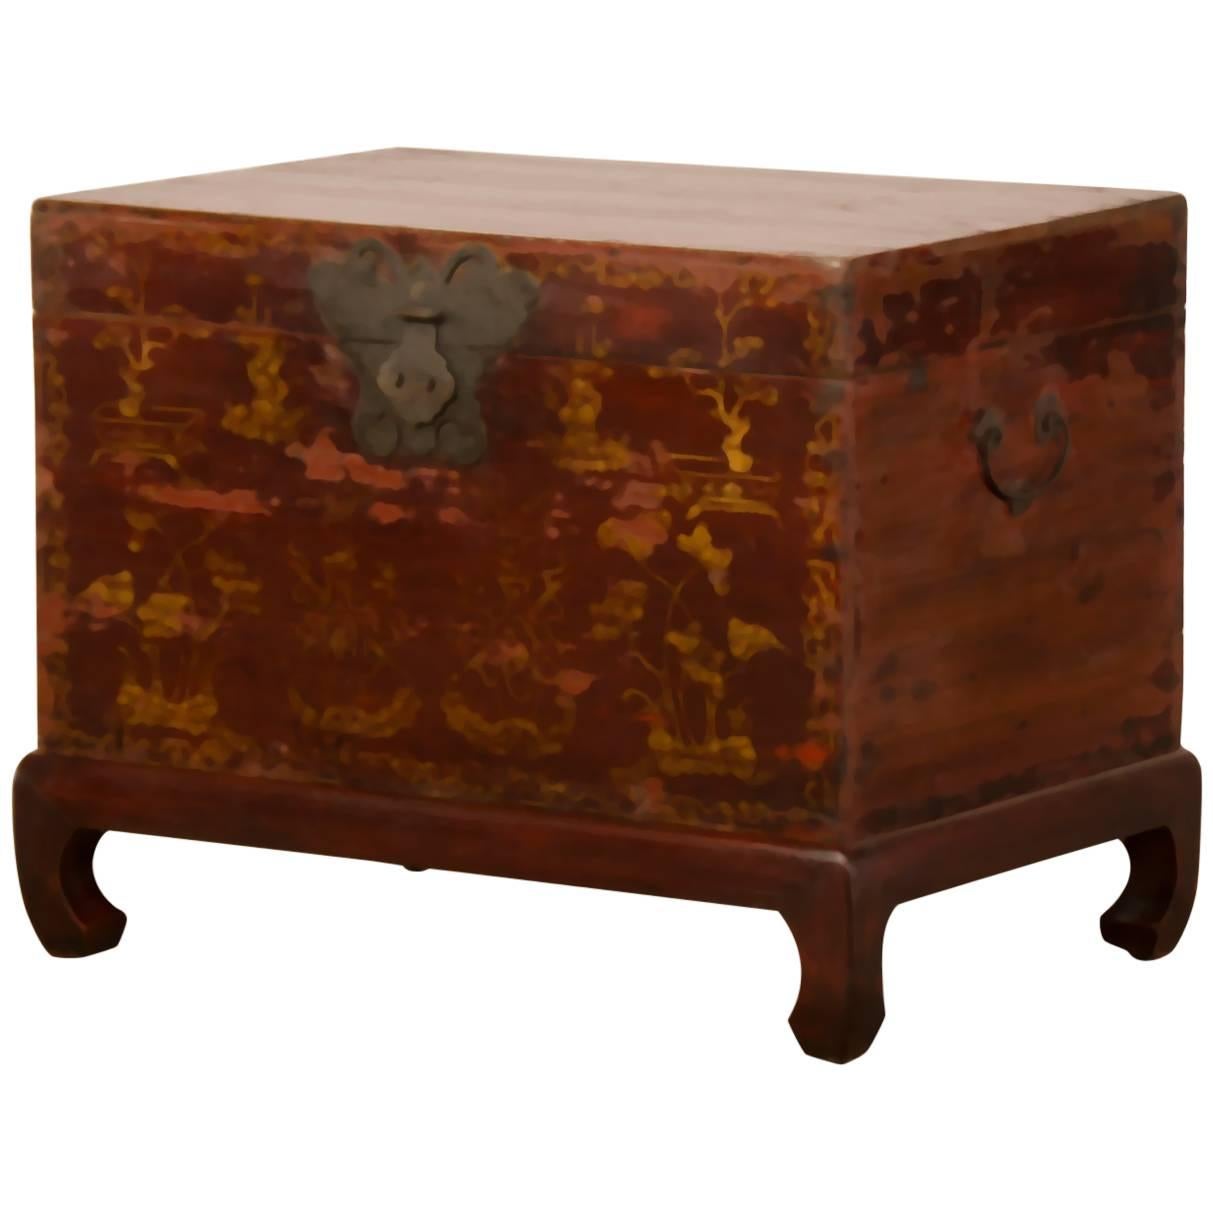 Red Lacquer Antique Chinese Trunk Kuang Hsu Period, circa 1875 For Sale